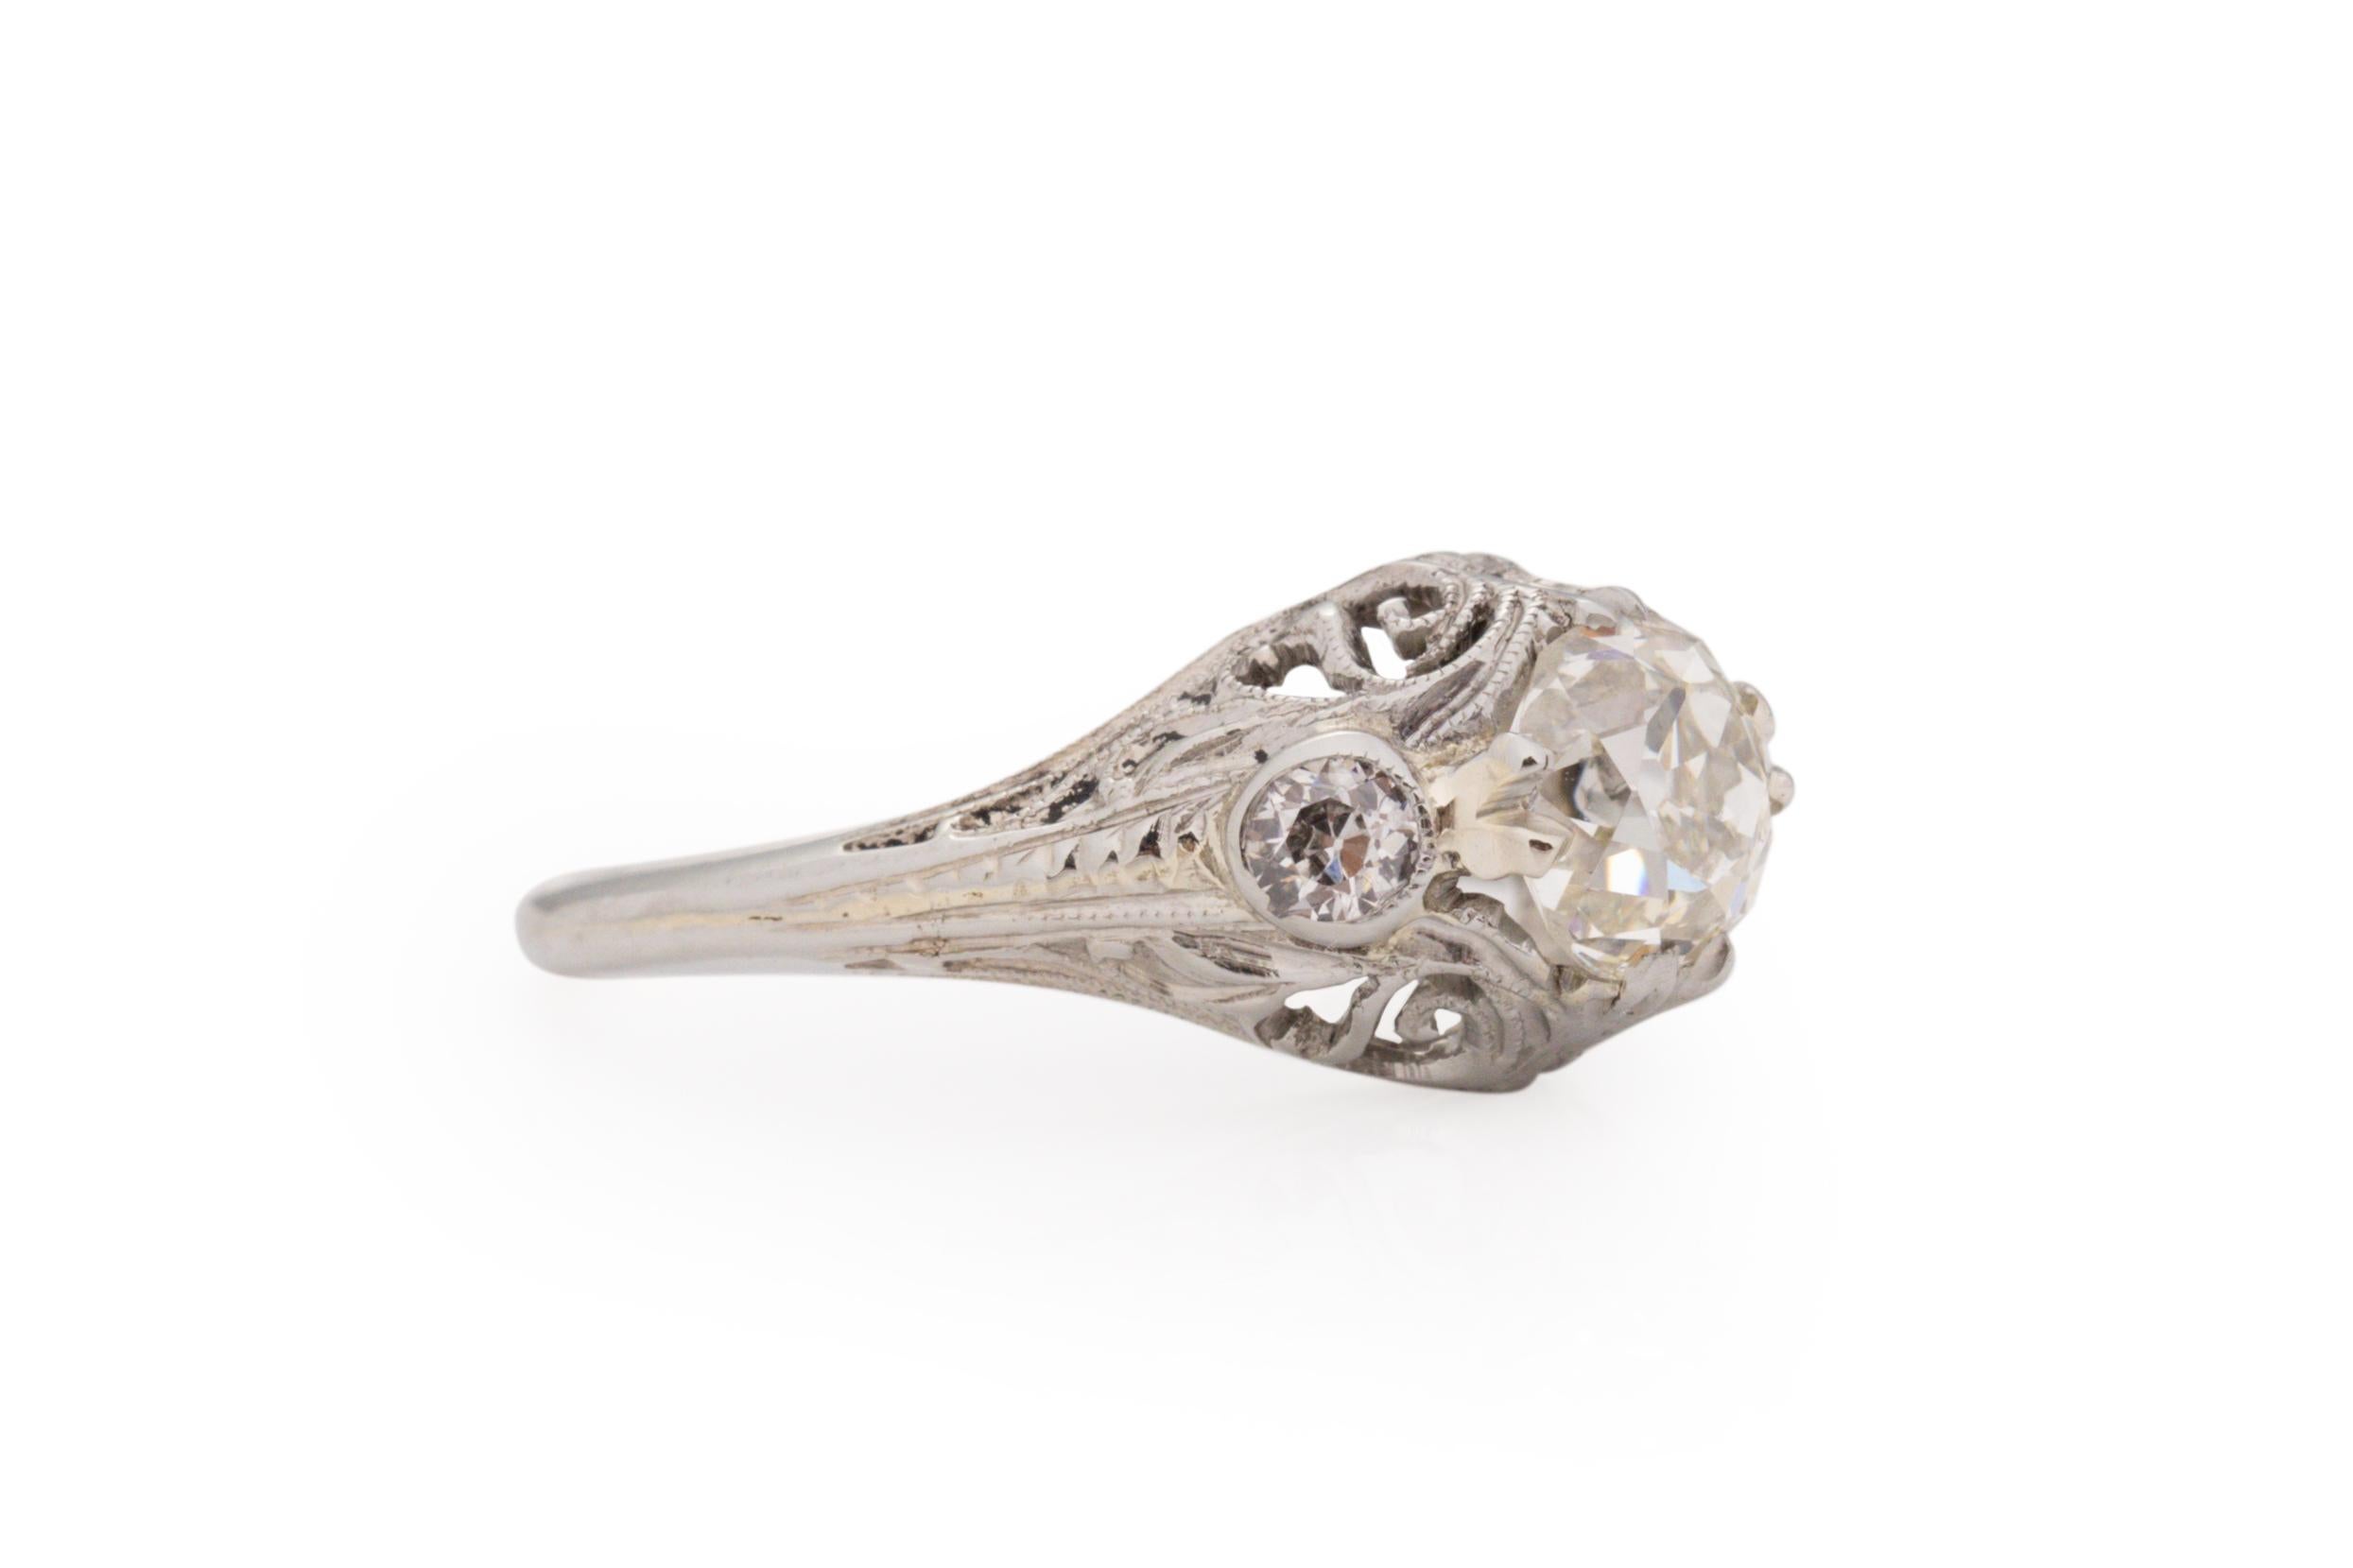 Ring Size: 4.75
Metal Type: 18 karat White Gold [Hallmarked, and Tested]
Weight: 2.5 grams

Center Diamond Details:
GIA REPORT #: 2387601883
Weight: .99 carat
Cut: Antique Cushion
Color: M
Clarity: VS1
Measurements: 6.01mm X 5.46mm x 4.03mm

Side